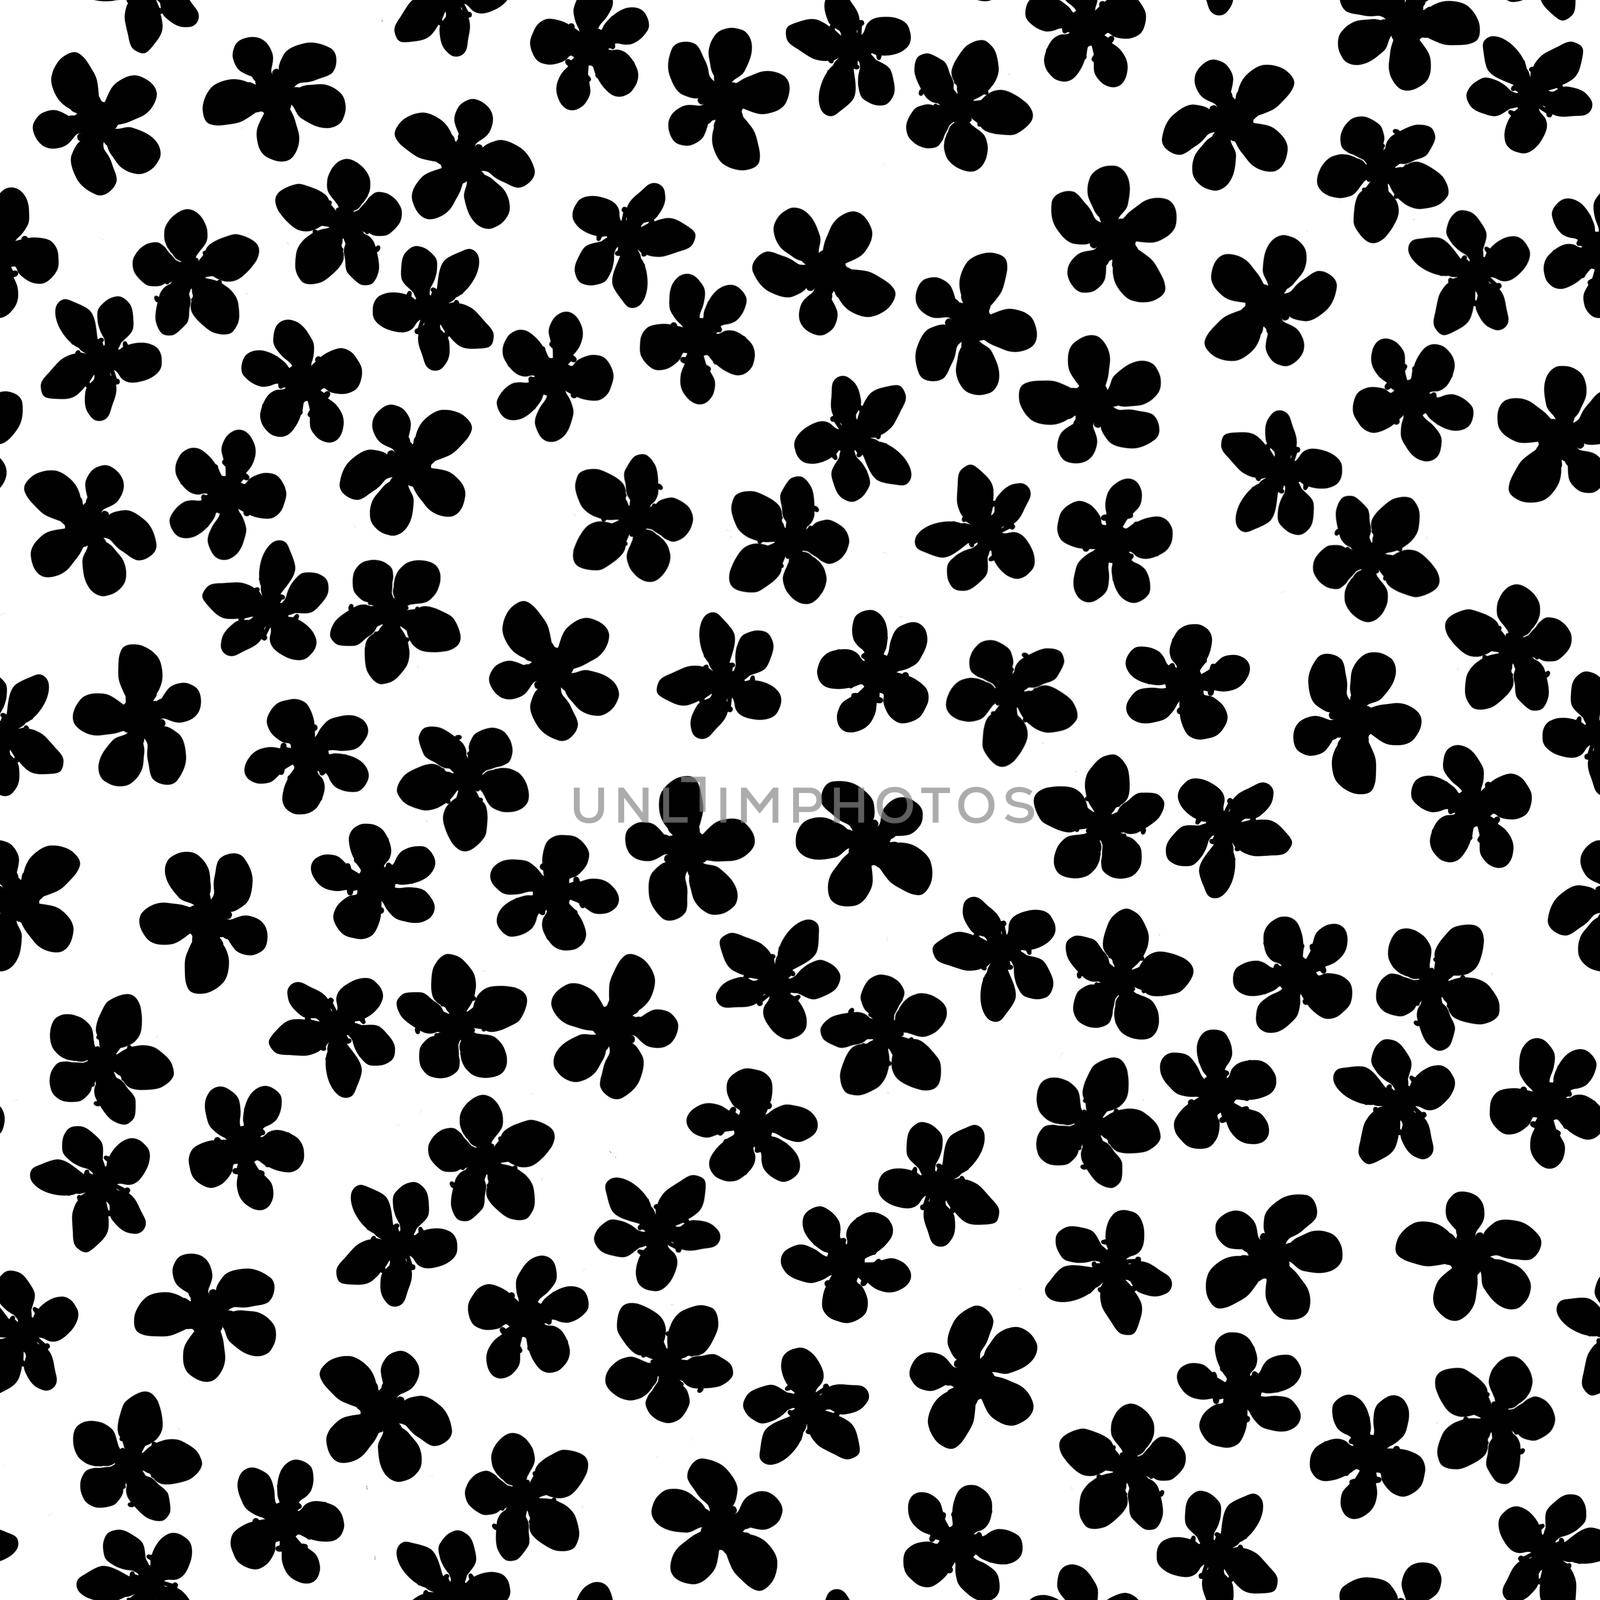 Seamless pattern with blossoming Japanese cherry sakura for fabric, packaging, wallpaper, textile decor, design, invitations, print, gift wrap, manufacturing. Black flowers on white background